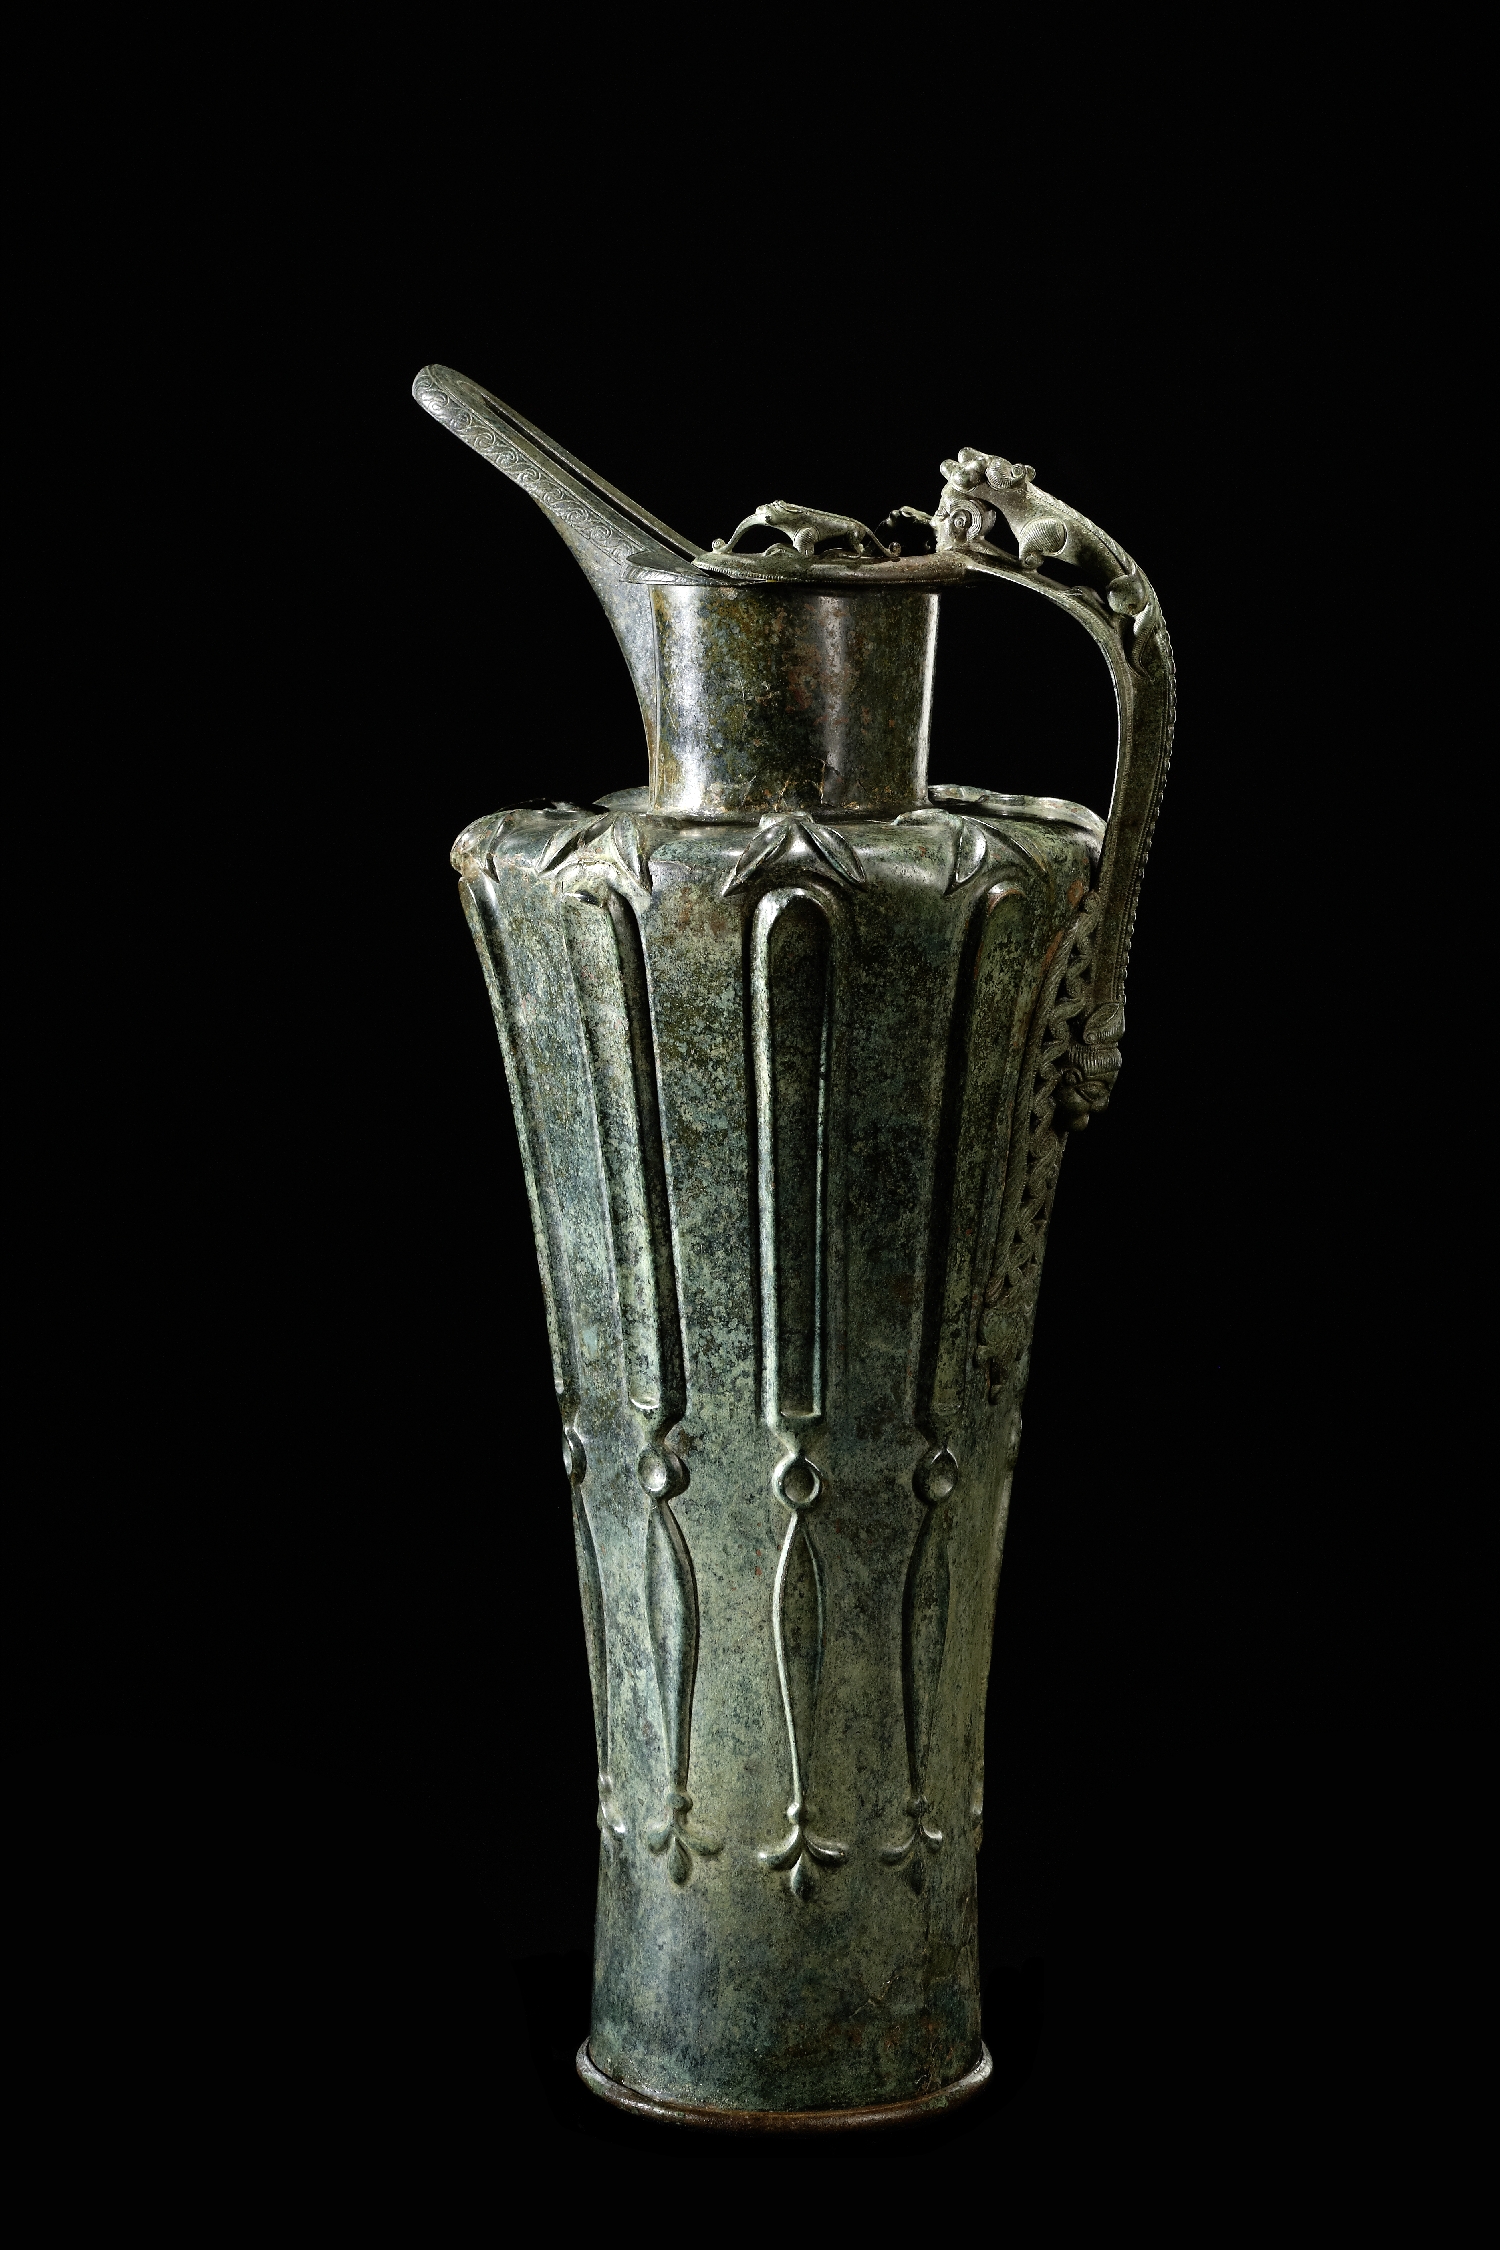 Beak-spouted jug, discovery location: Hallein-Dürrnberg, Latène Period, phase Lt A, 5th c. BC, bronze, inv. no. ARCH 6629